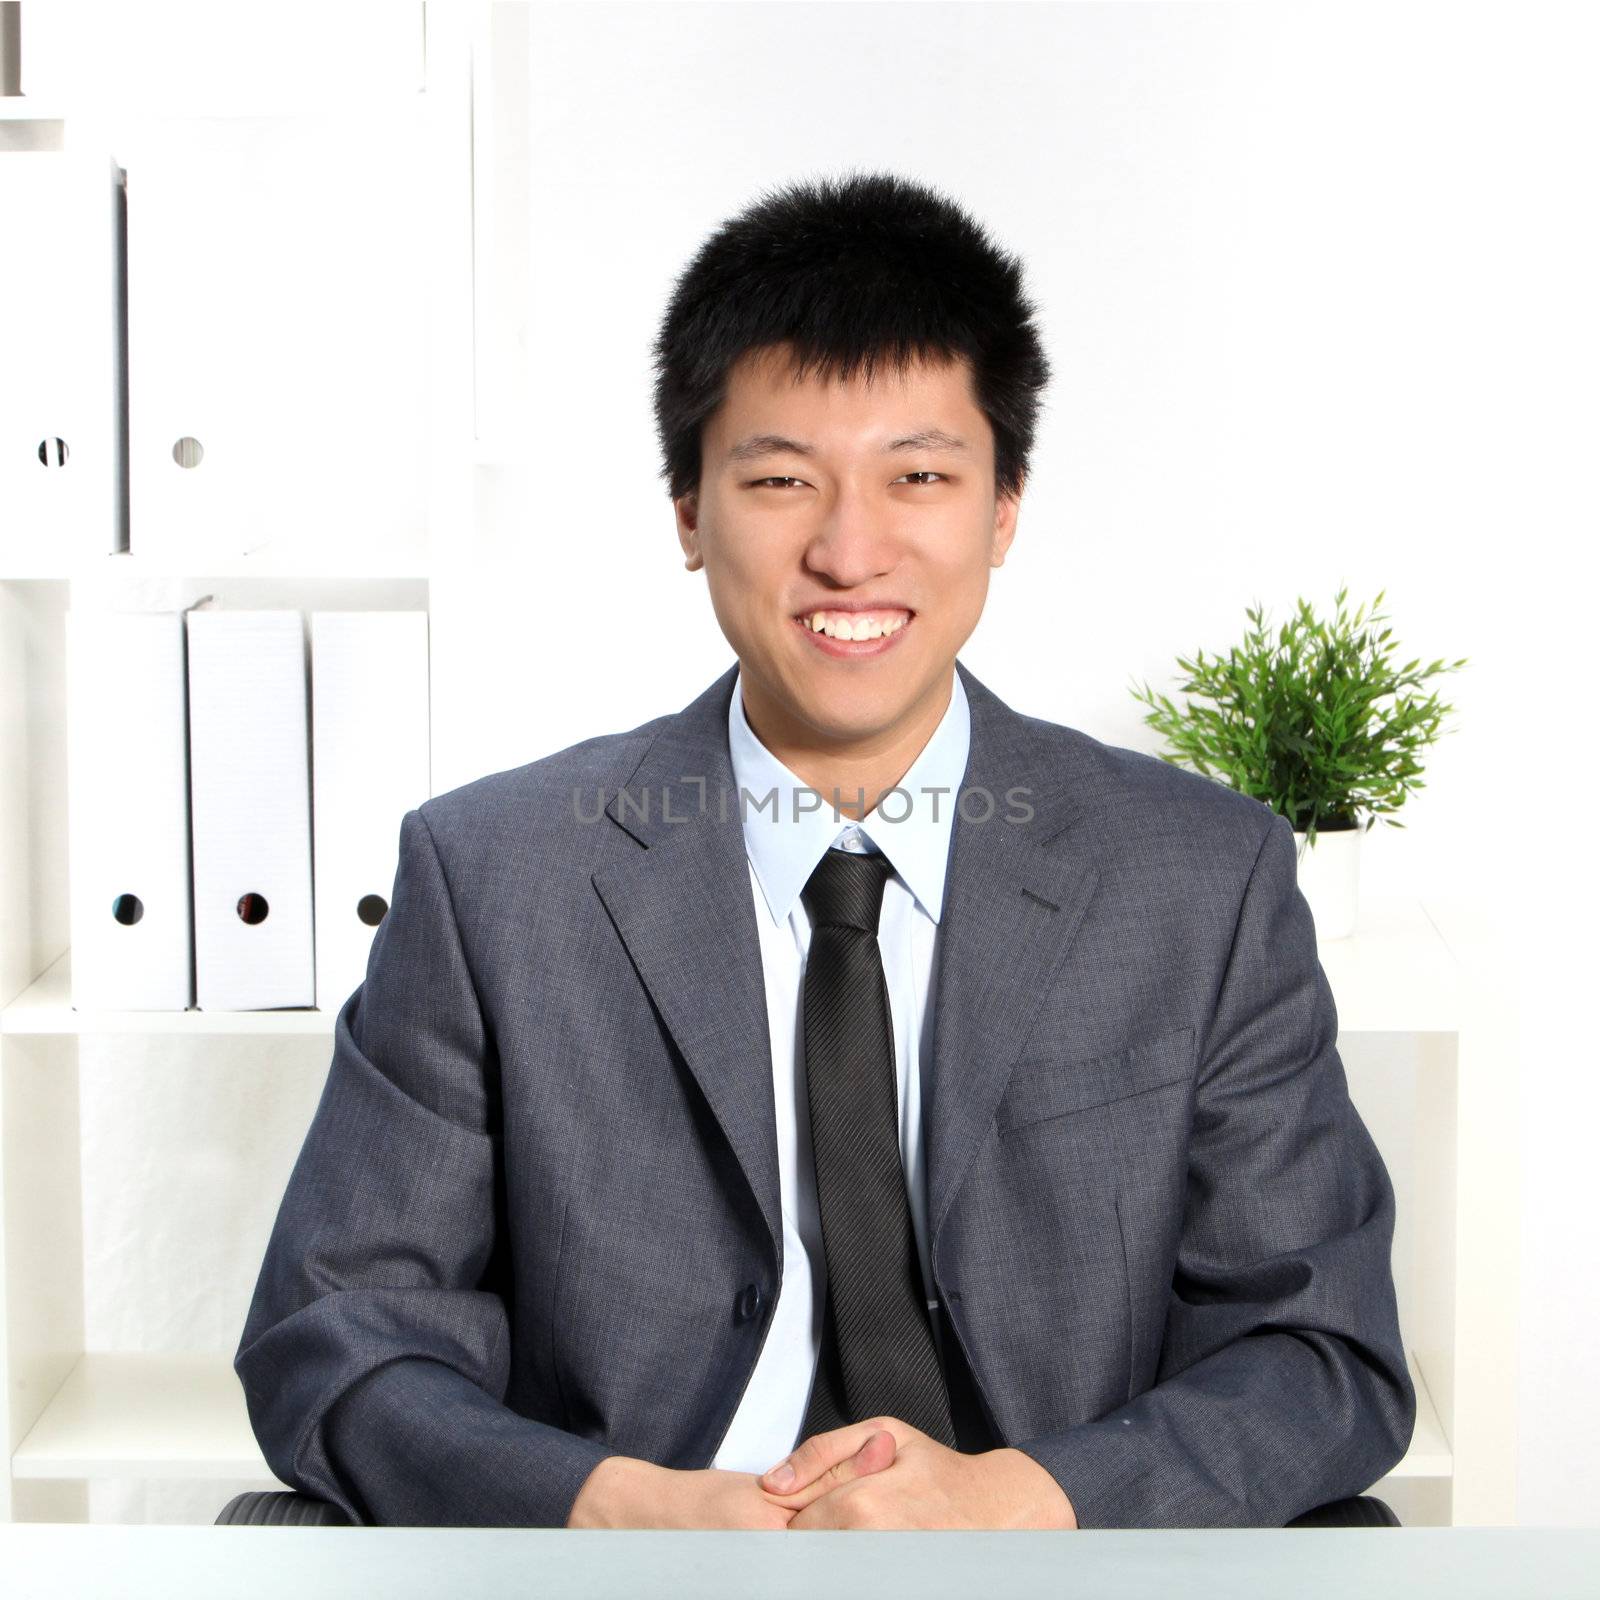 Confident happy young Asian businessman by Farina6000